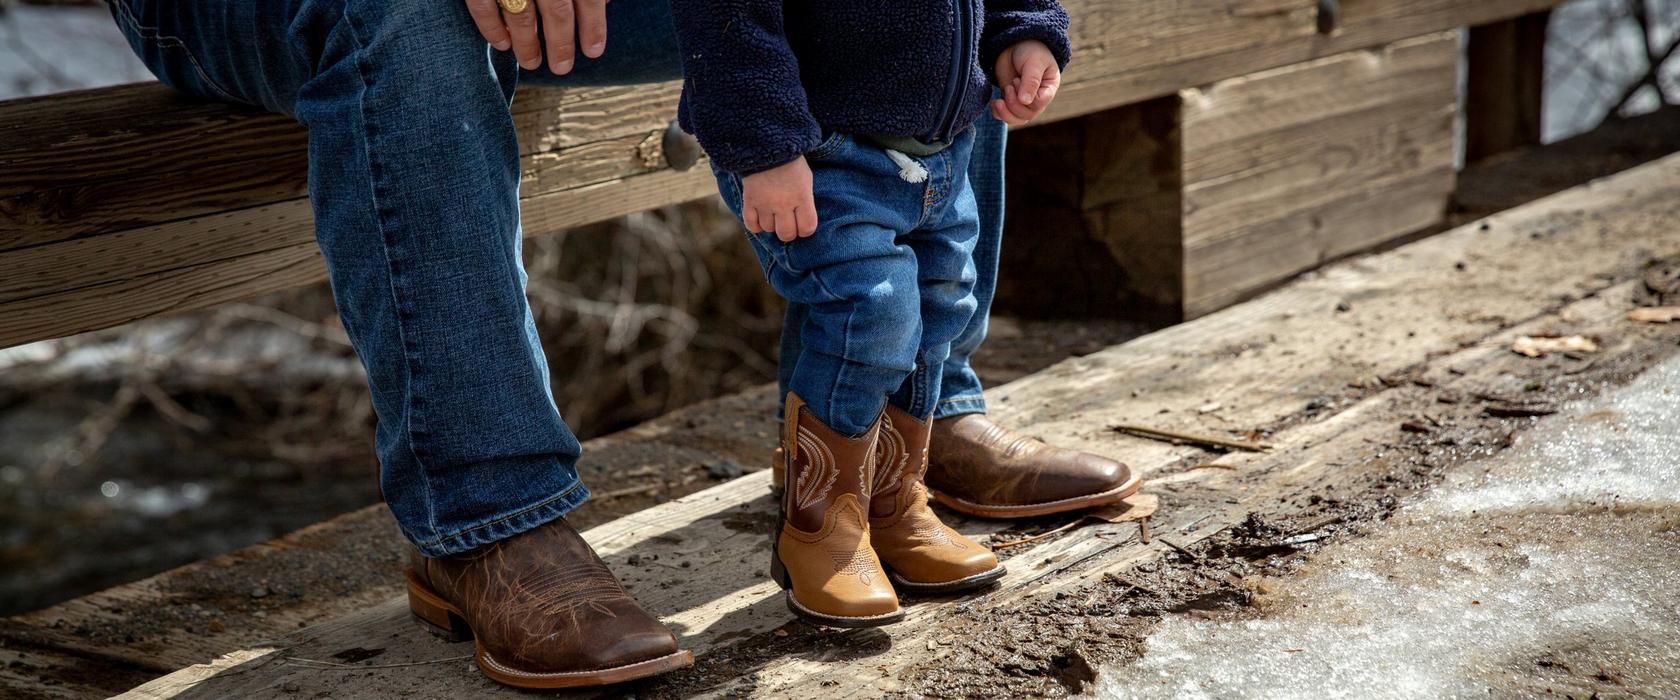 Perfect Gifts for Farm Kids - Roots & Boots